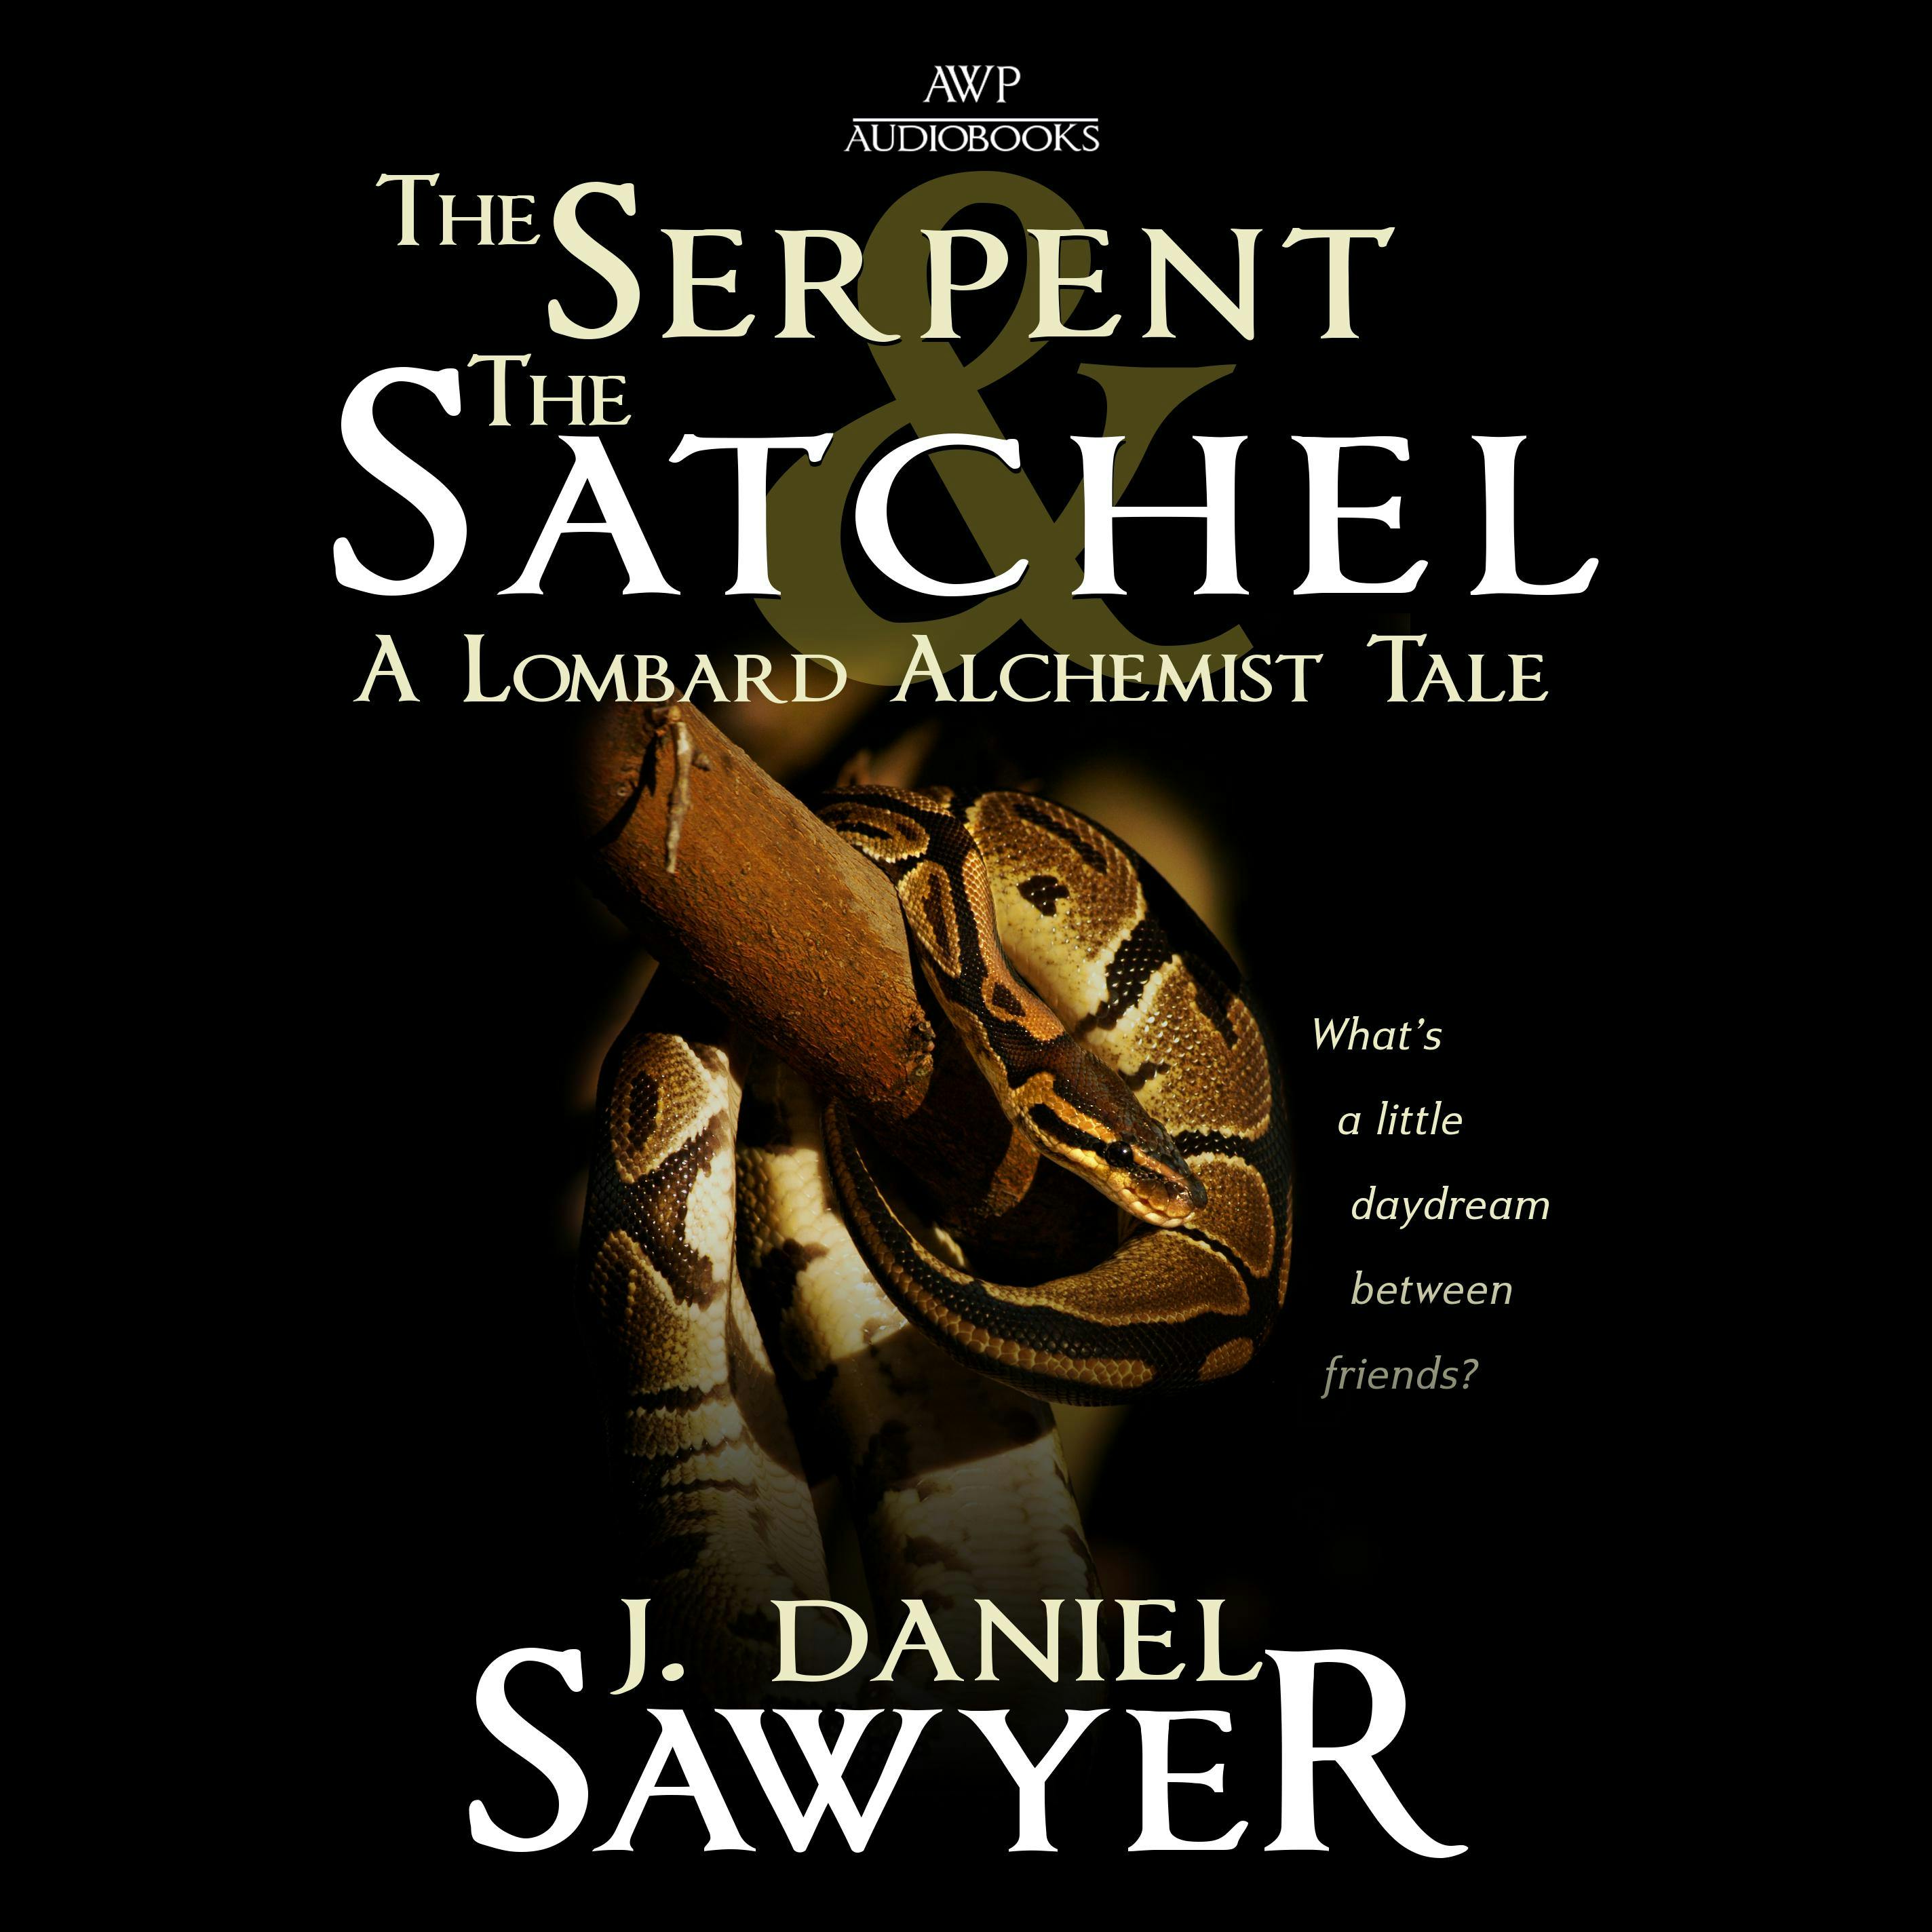 The Serpent and the Satchel - undefined